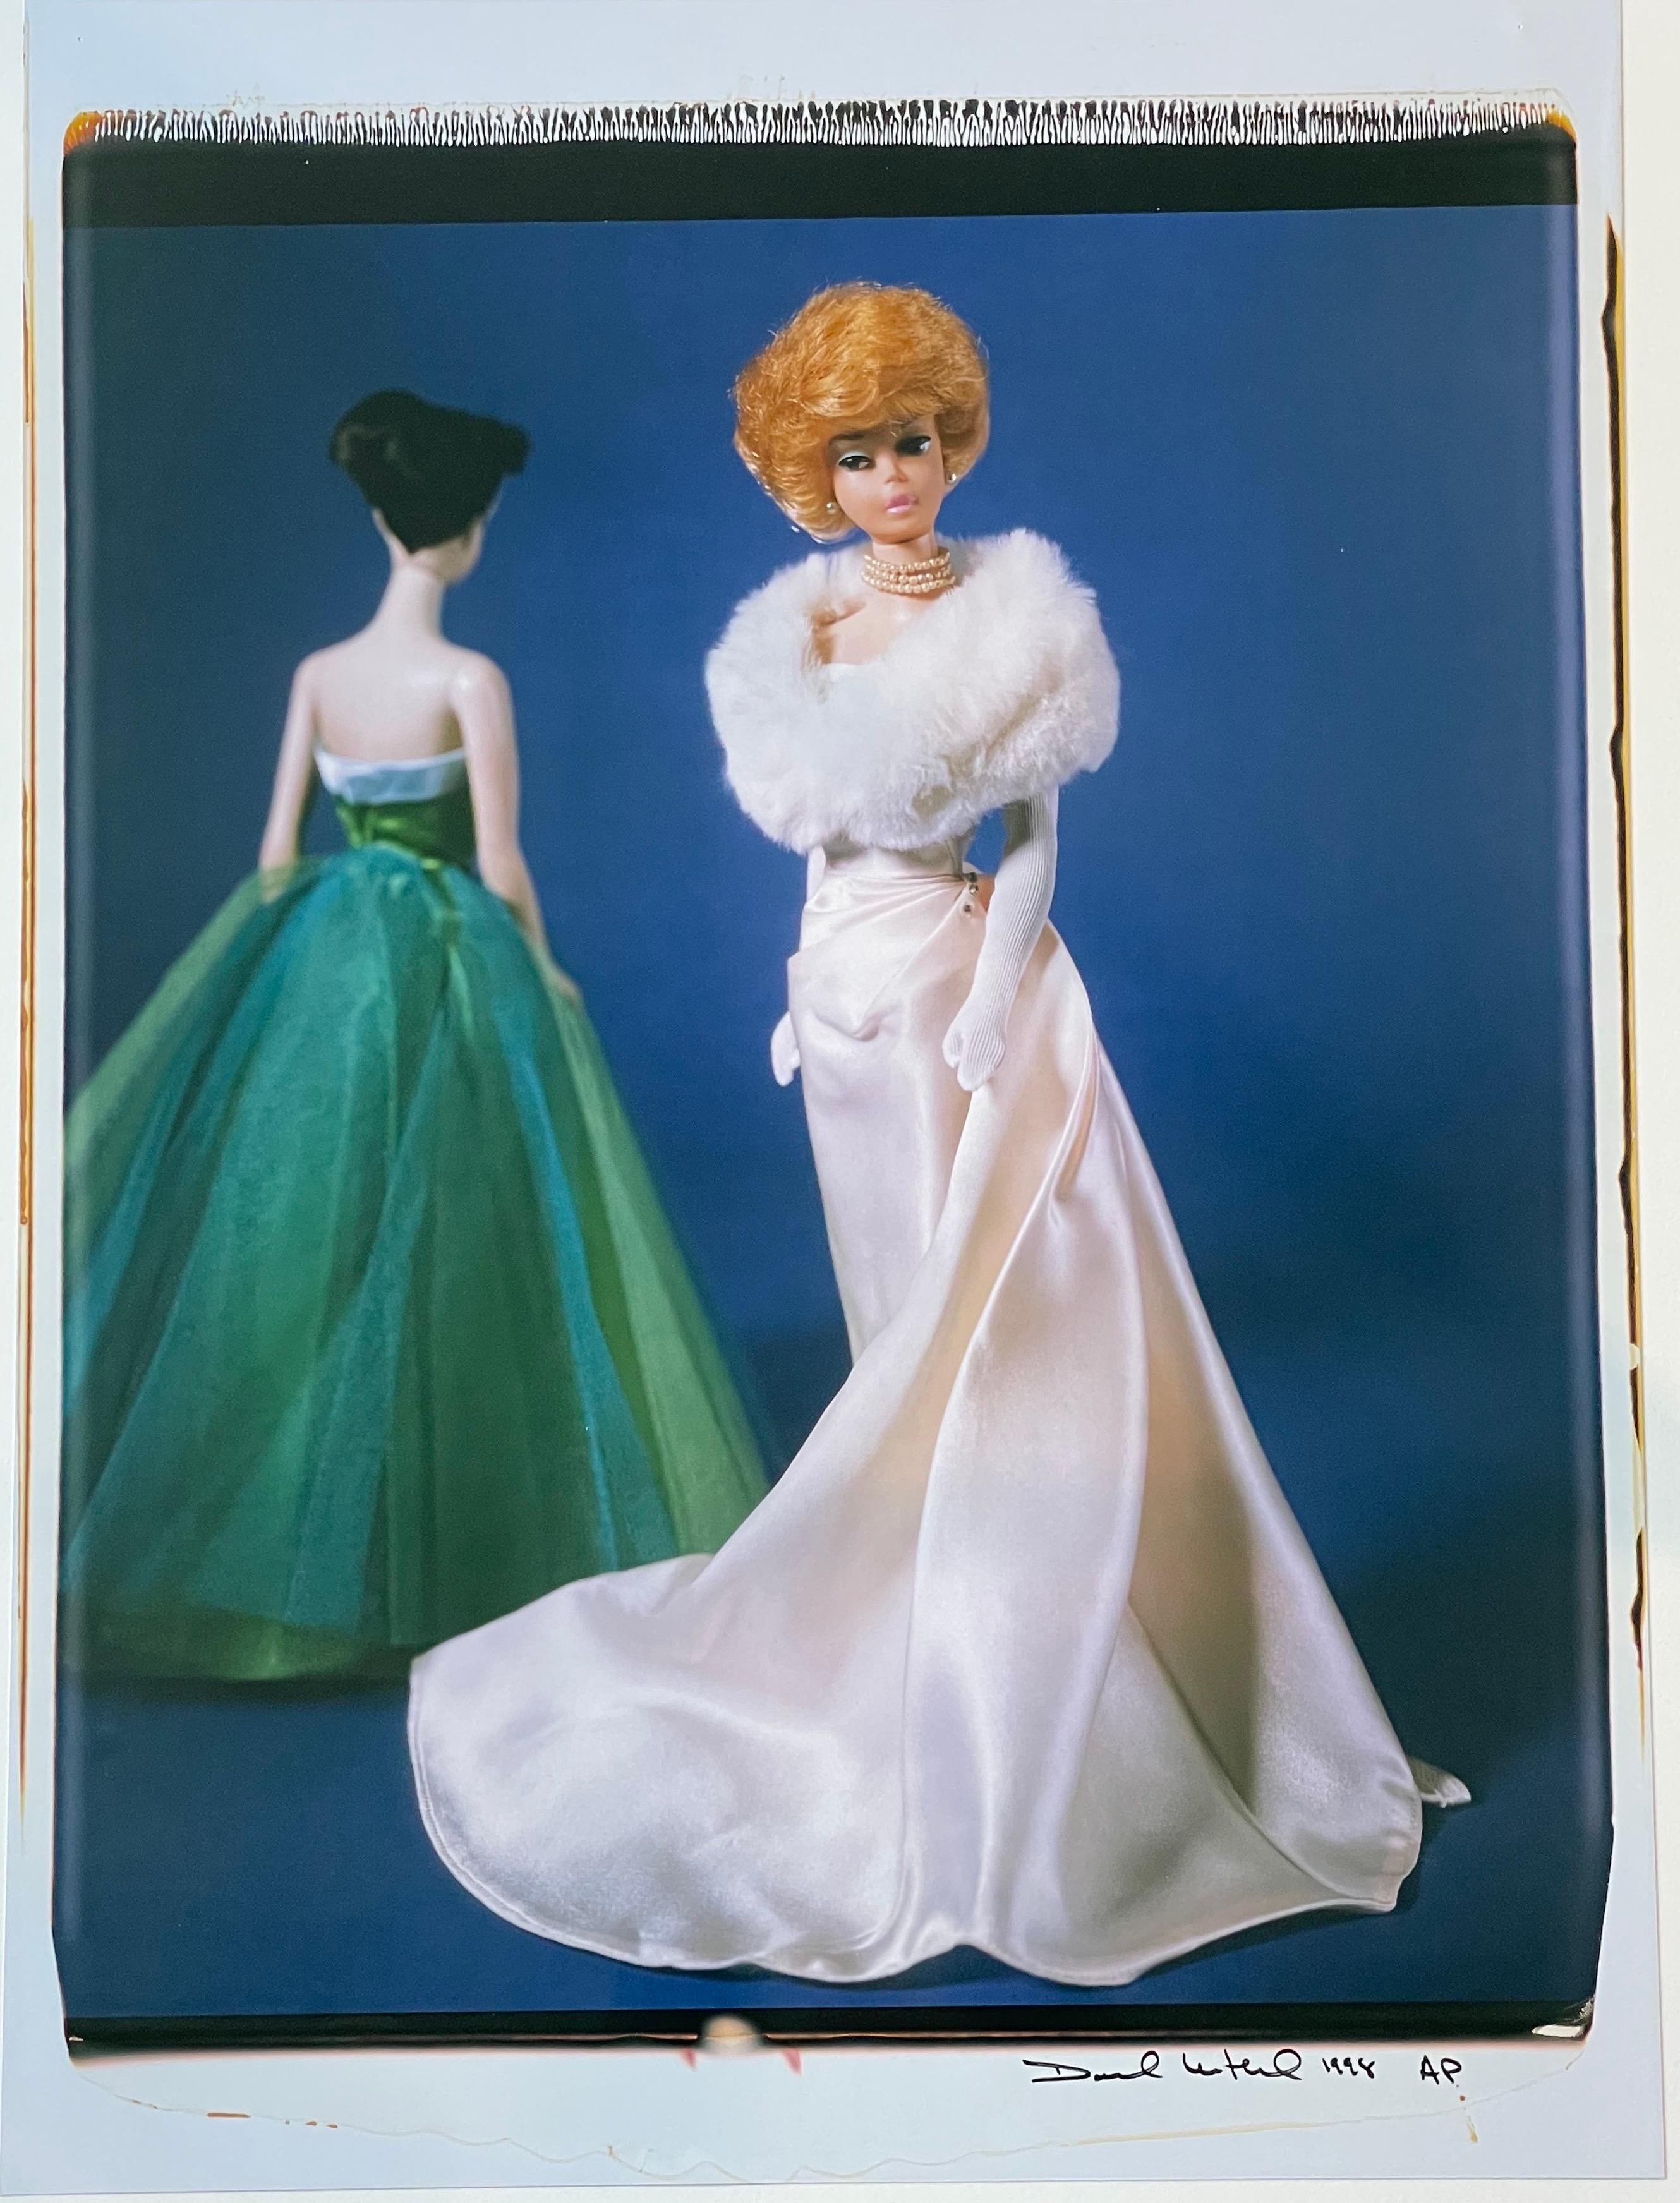 David Levinthal Color Photograph - Untitled from Barbie (Ballgowns, BAR 38)